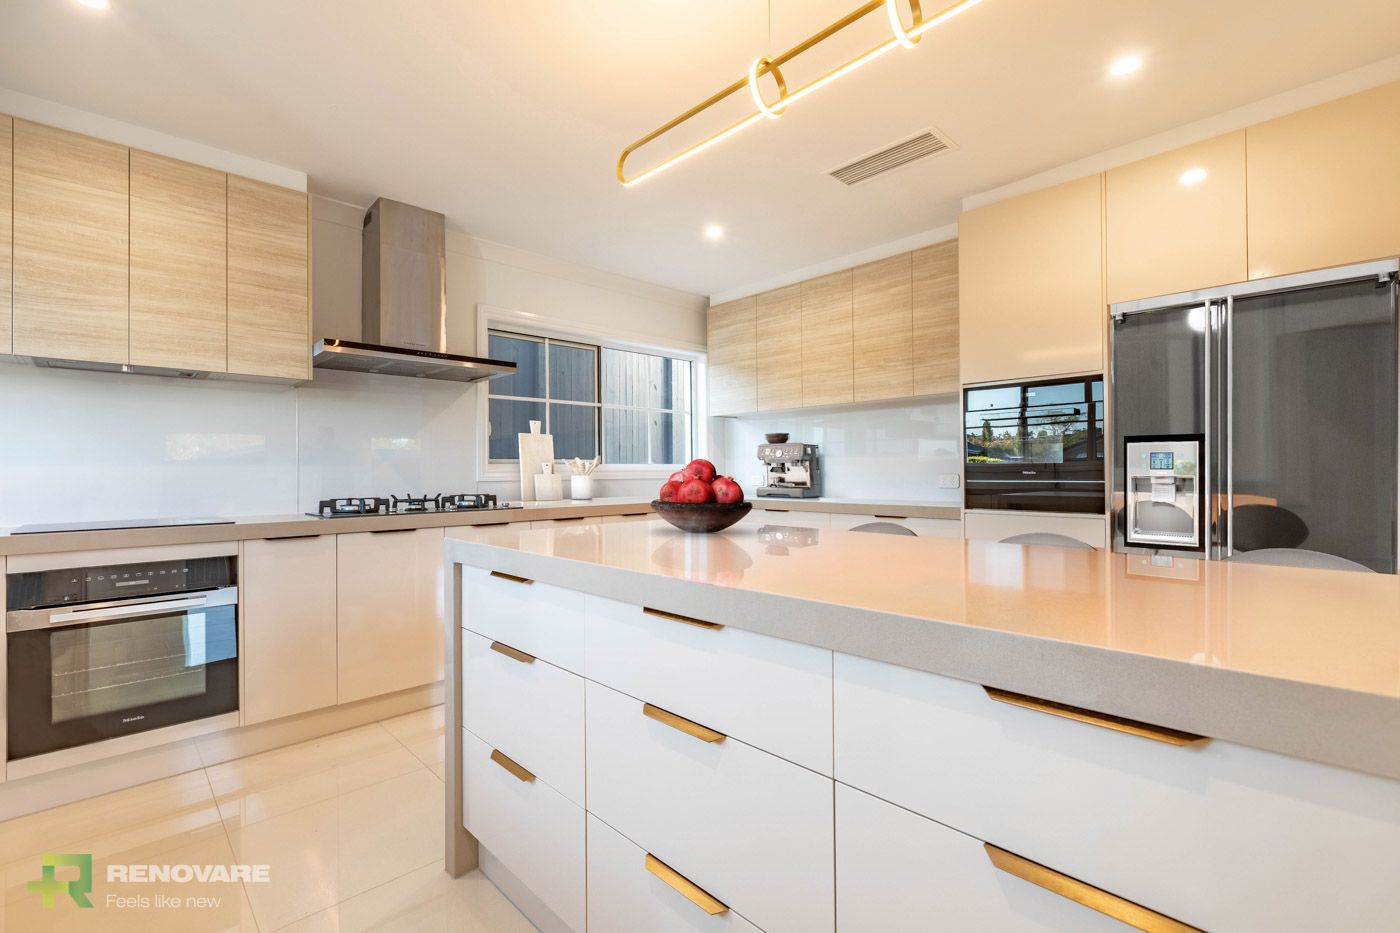 Kitchen Renovations Banner | featured image for Our Work Renovare Mt Gravatt.